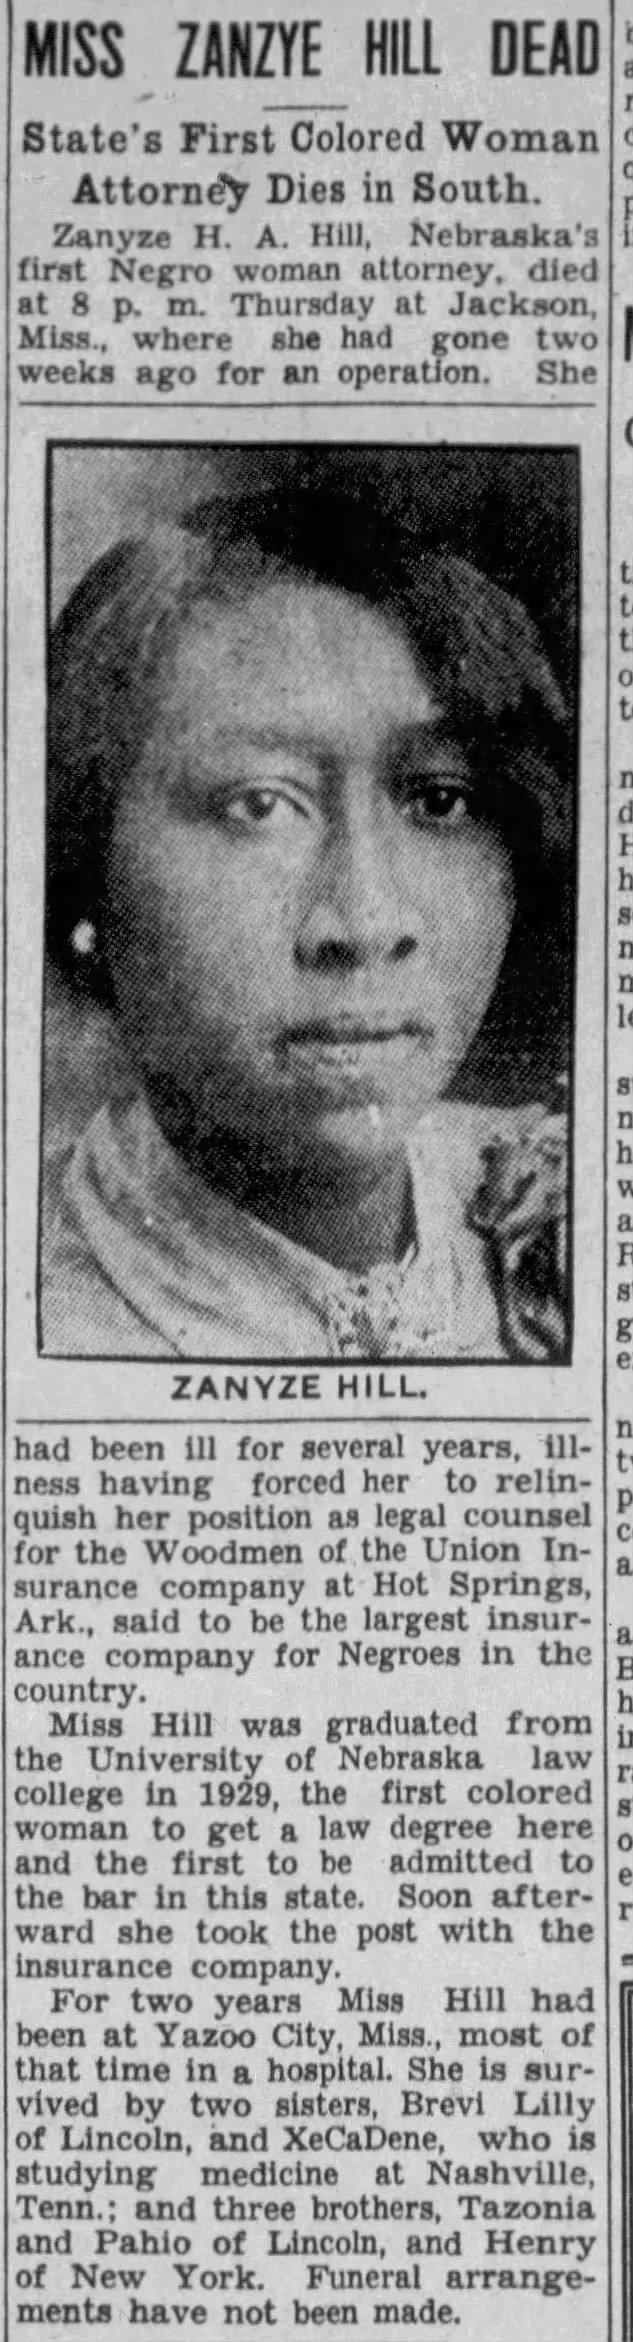 Miss Zanzye Hill Dead; State's First Colored Woman Attorney Dies in South